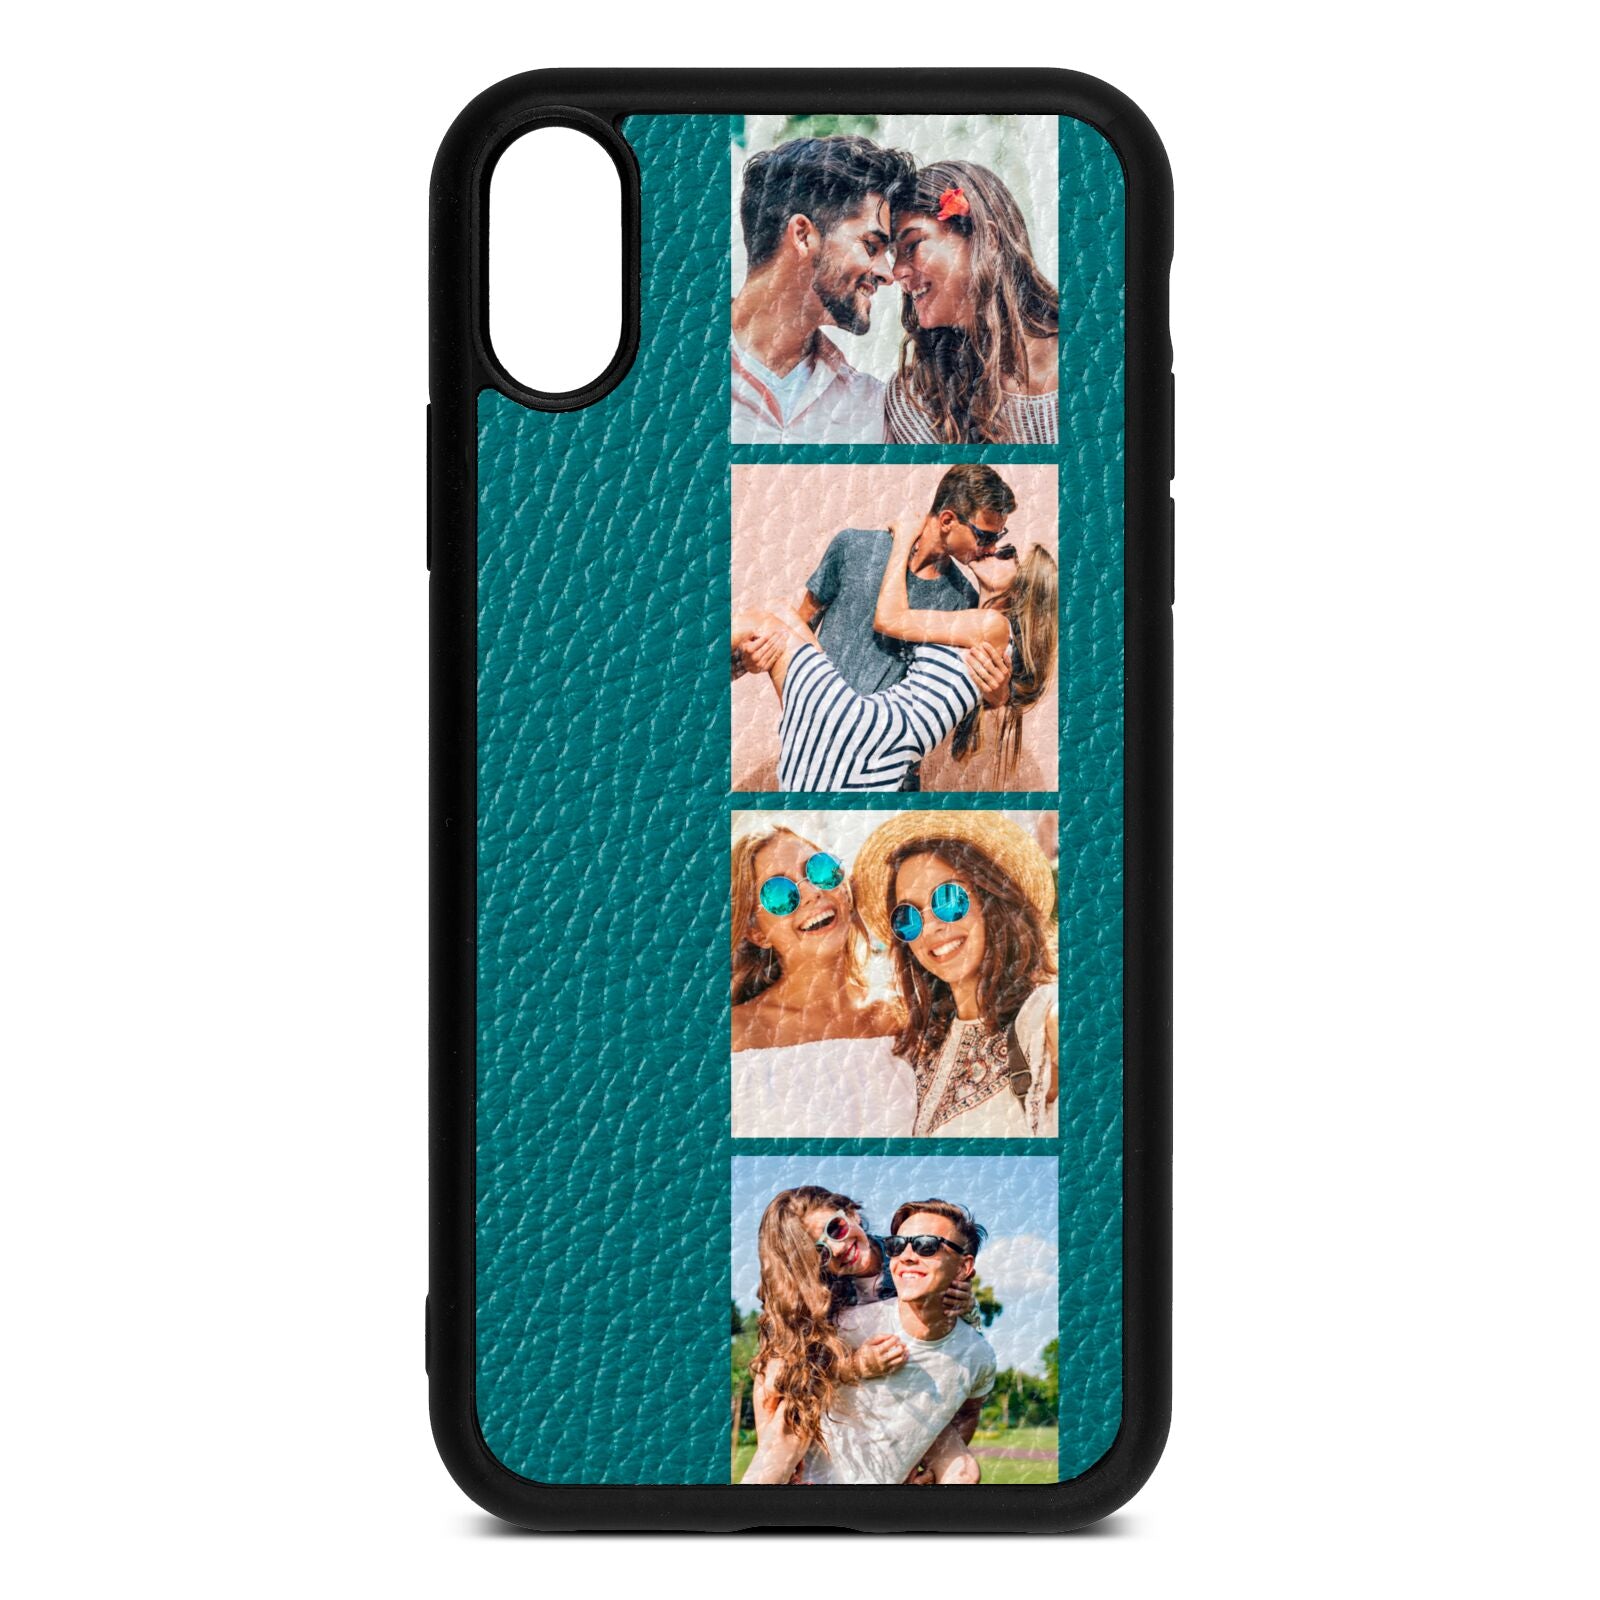 Photo Strip Montage Upload Green Pebble Leather iPhone Xr Case